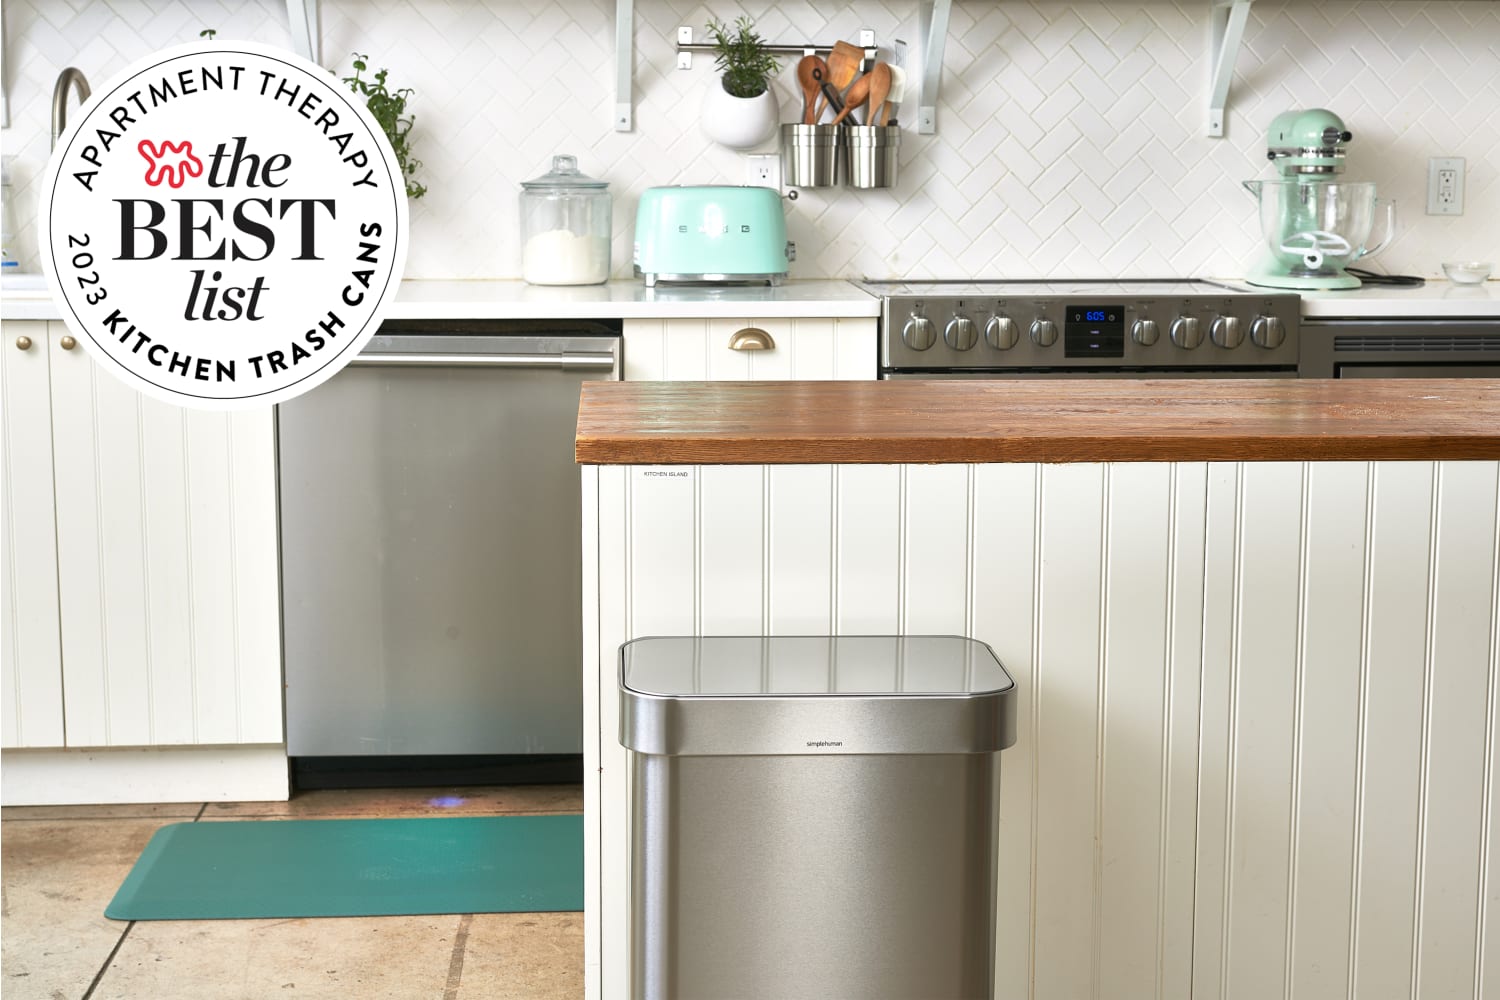 https://cdn.apartmenttherapy.info/image/upload/f_auto,q_auto:eco,c_fill,g_auto,w_1500,ar_3:2/AT%20Best%20List%2Fbest-list-kitchen-trash-cans